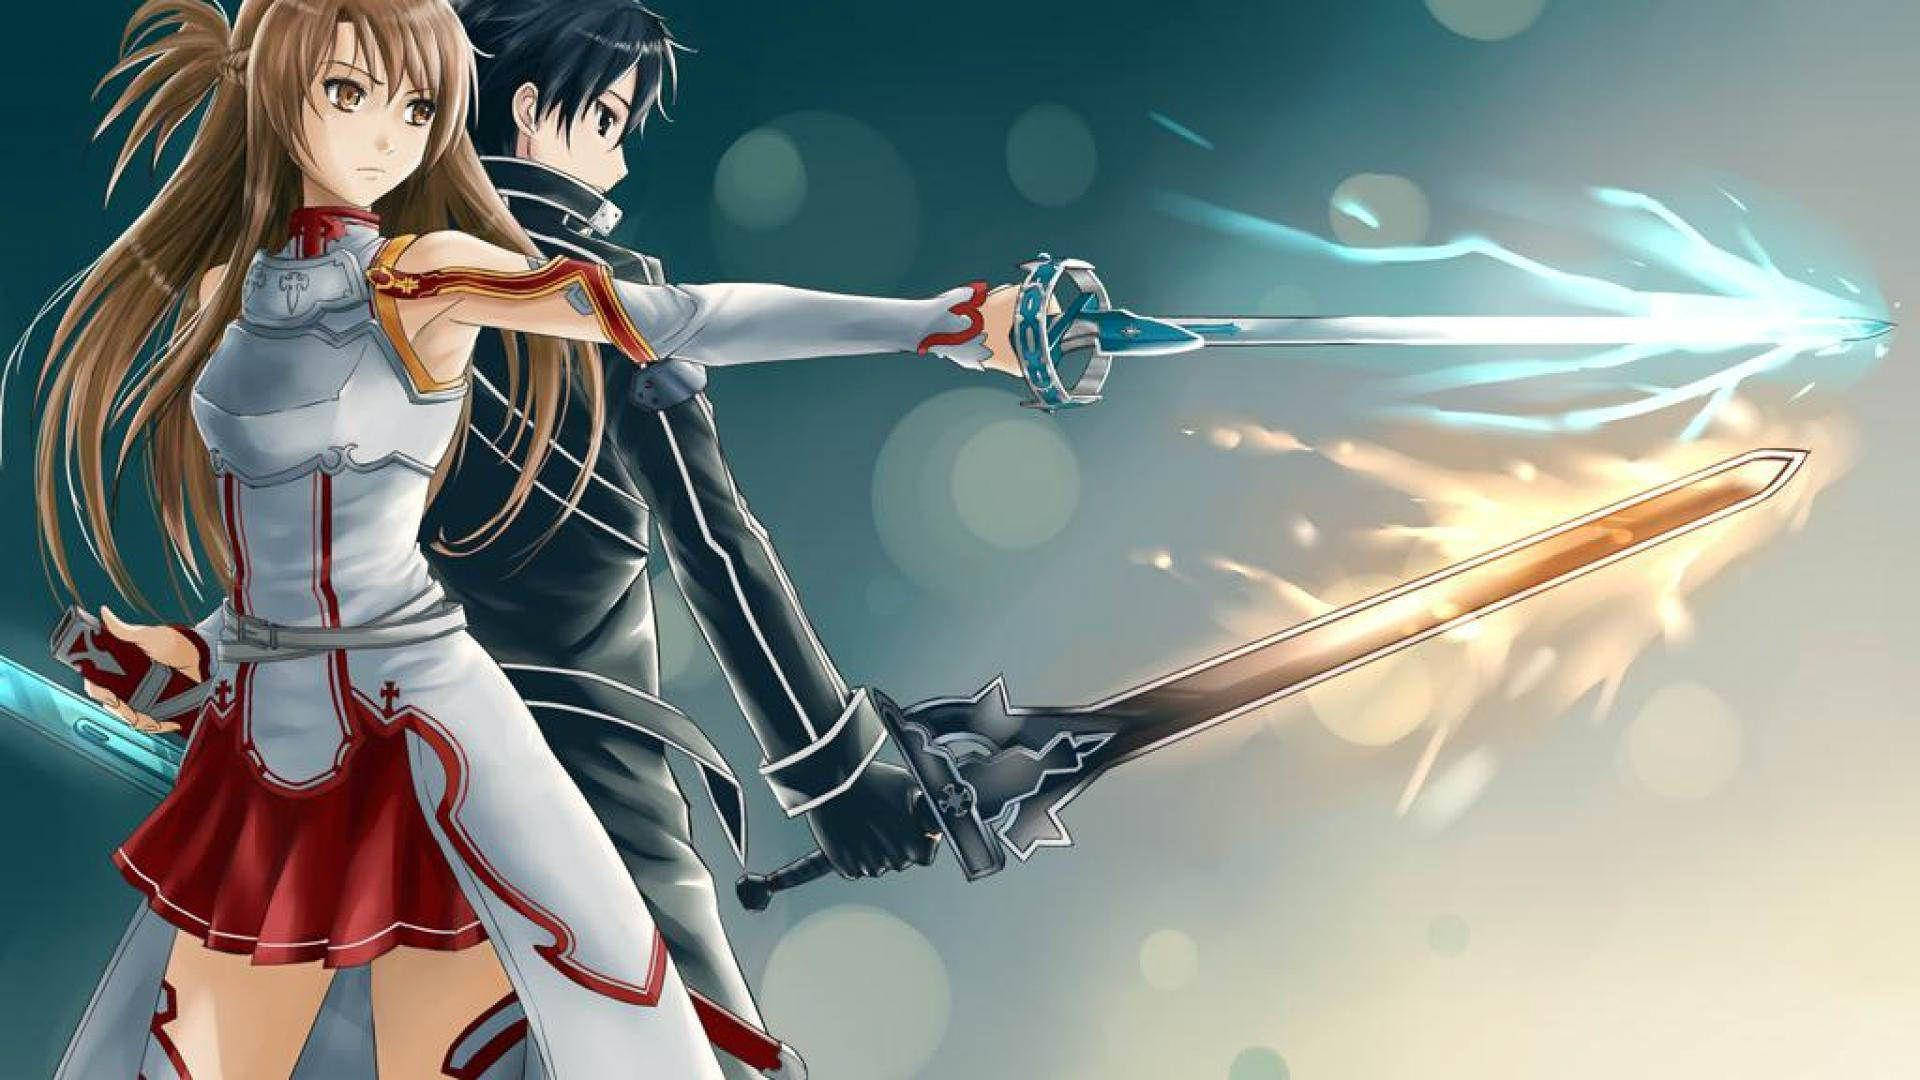 Kirito Fights Together With Asuna Background